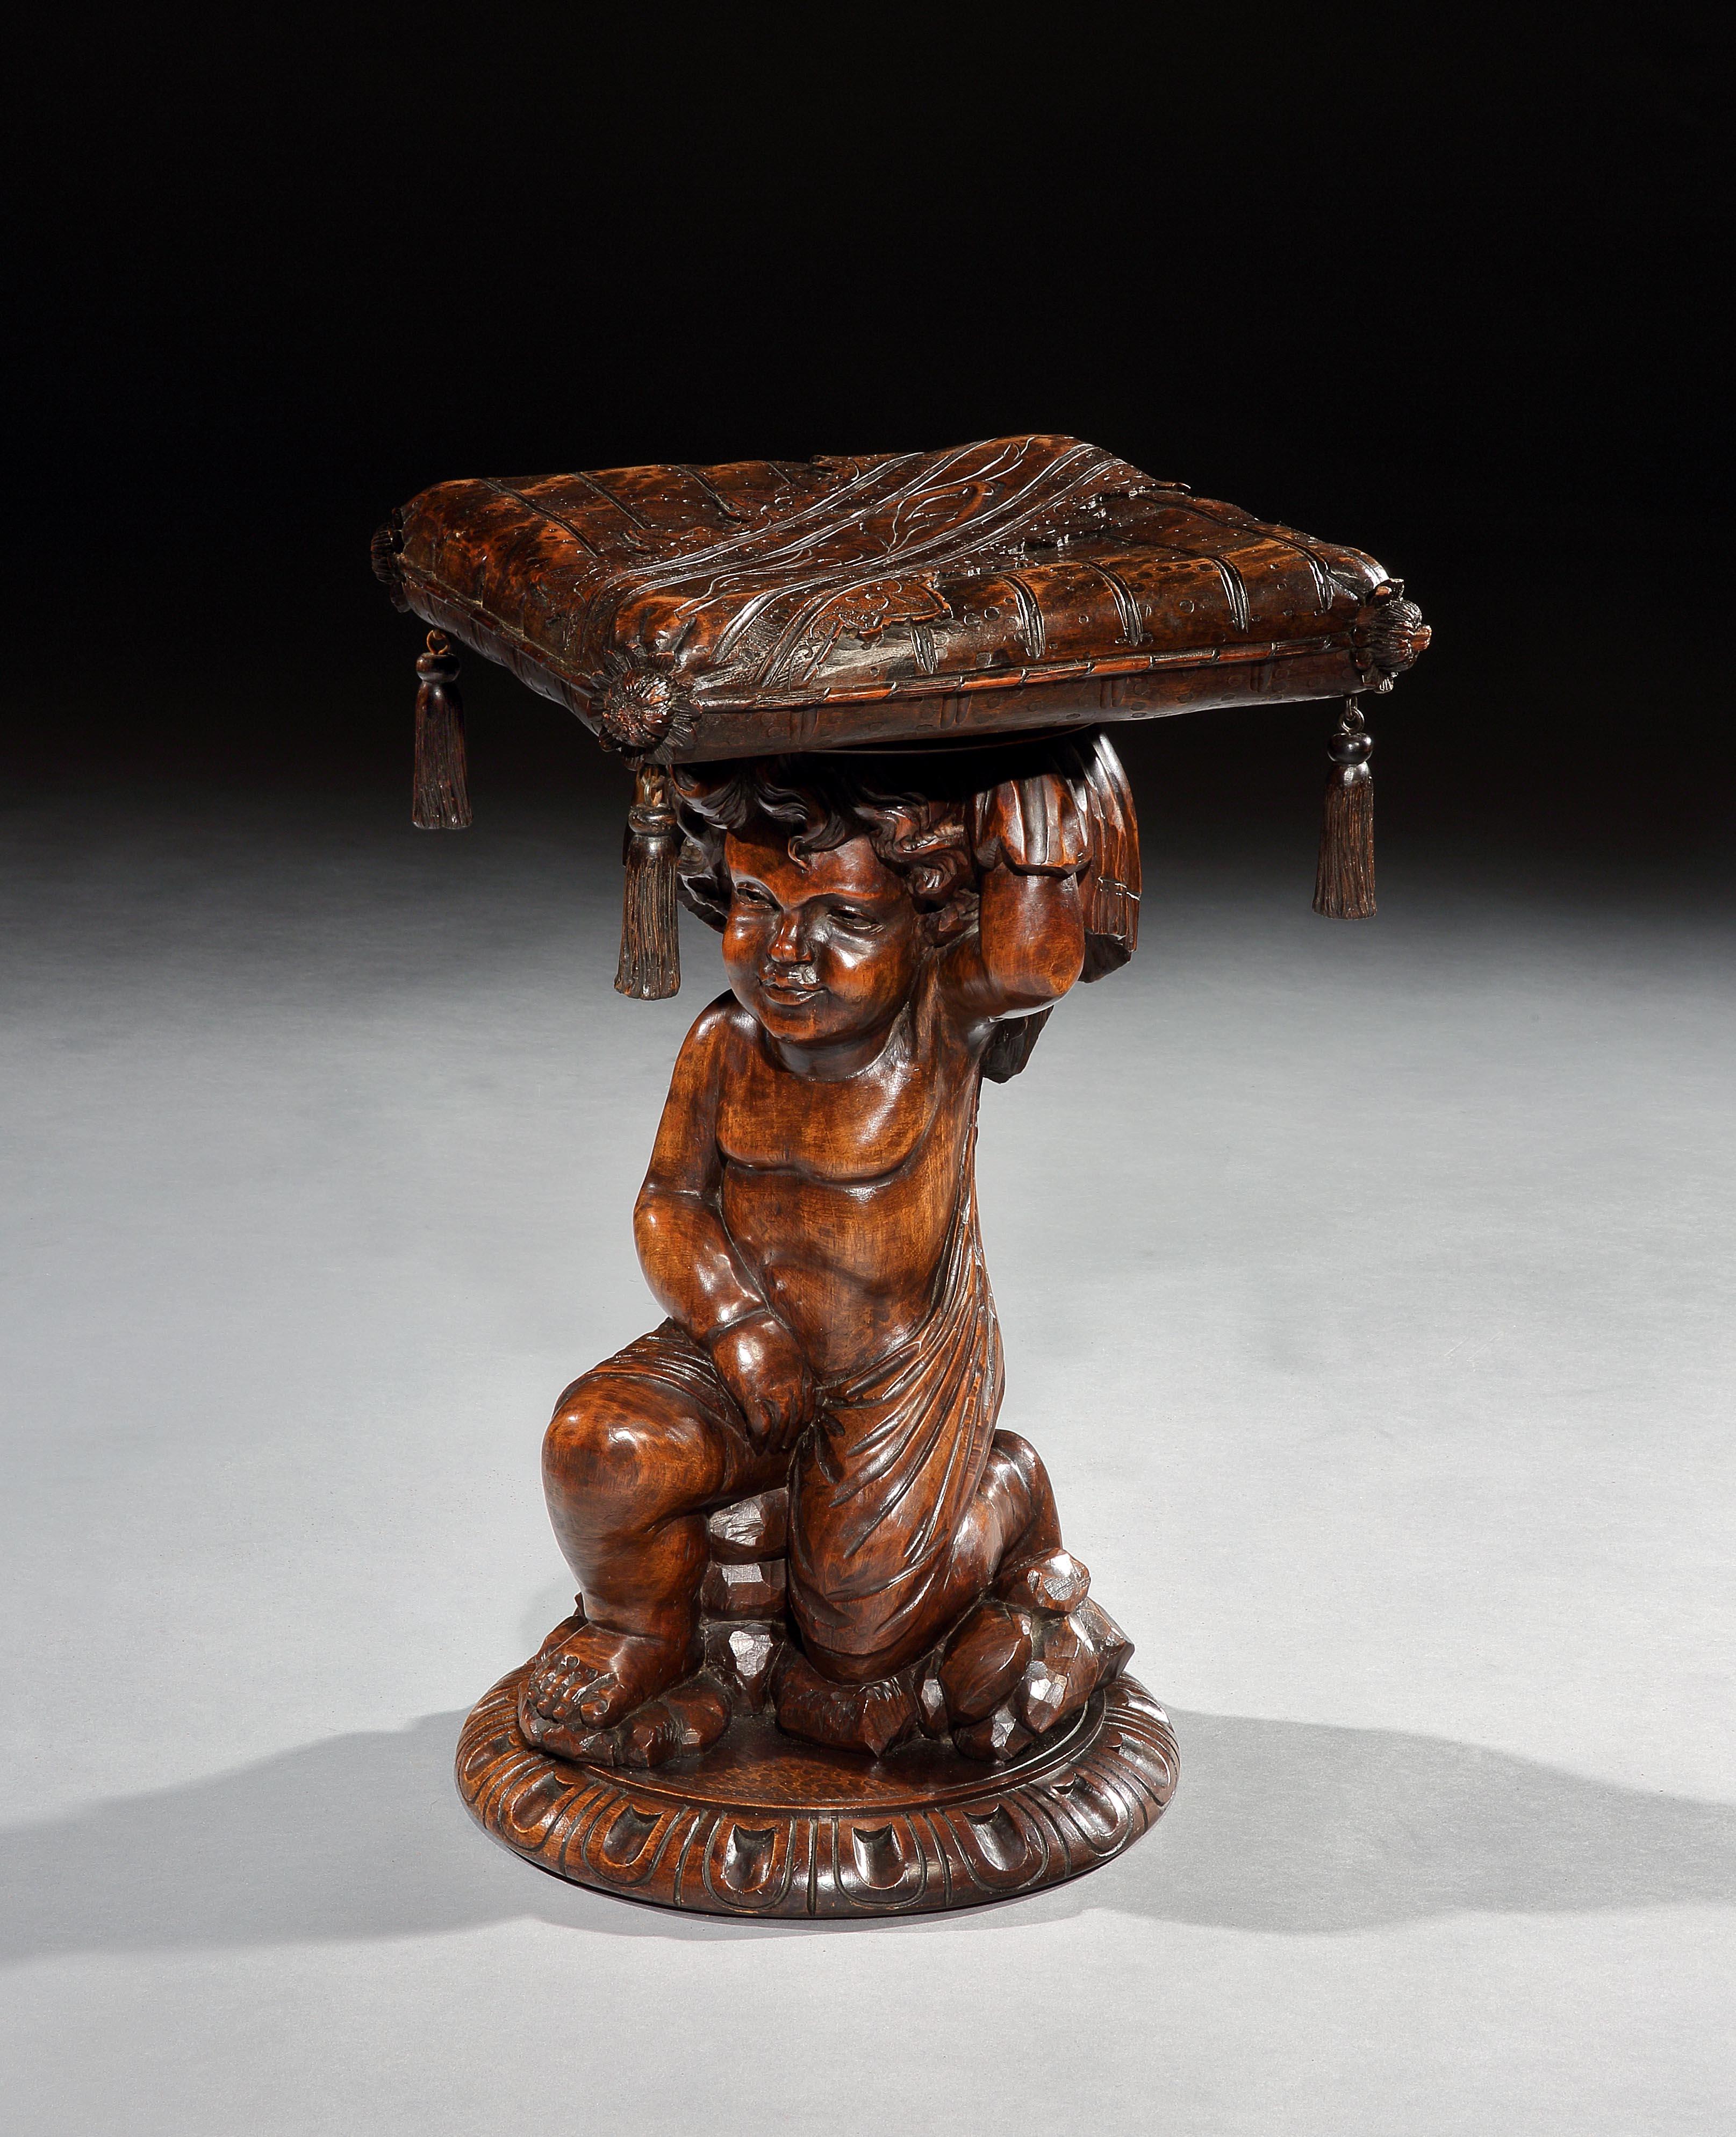 This unusual stool has a fine sculptural quality, combining functionality with artistic merit. The kneeling cherub is in service, holding the elaborate cushion on his head for his master to sit on. 

A fabulous 18th century, Baroque, Venetian,